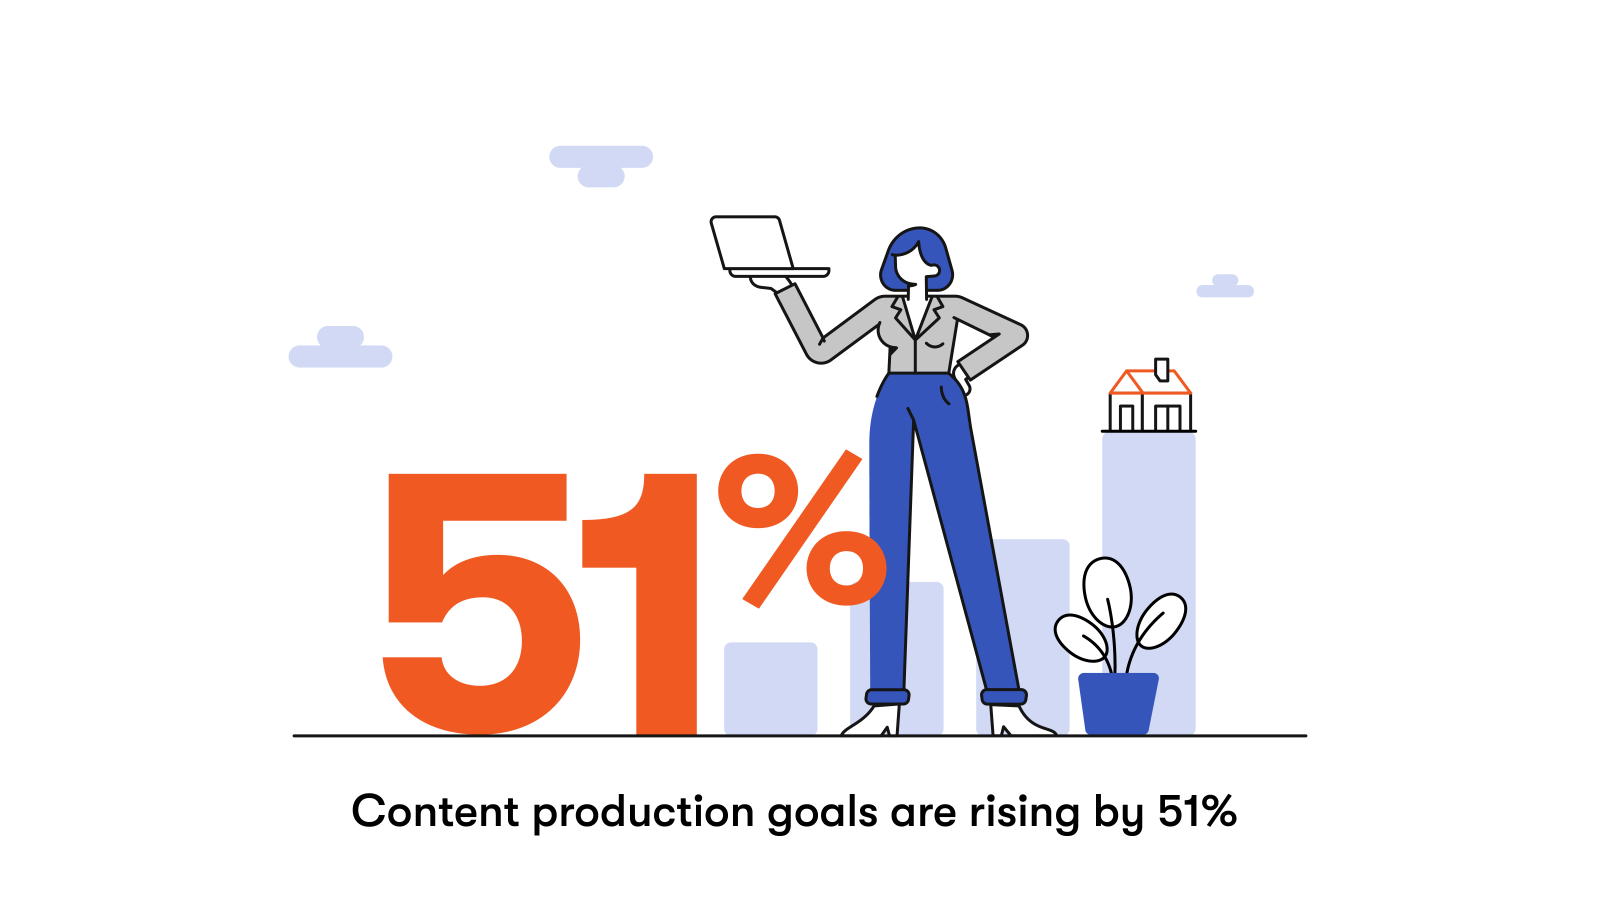 51% of companies working to increase their content production